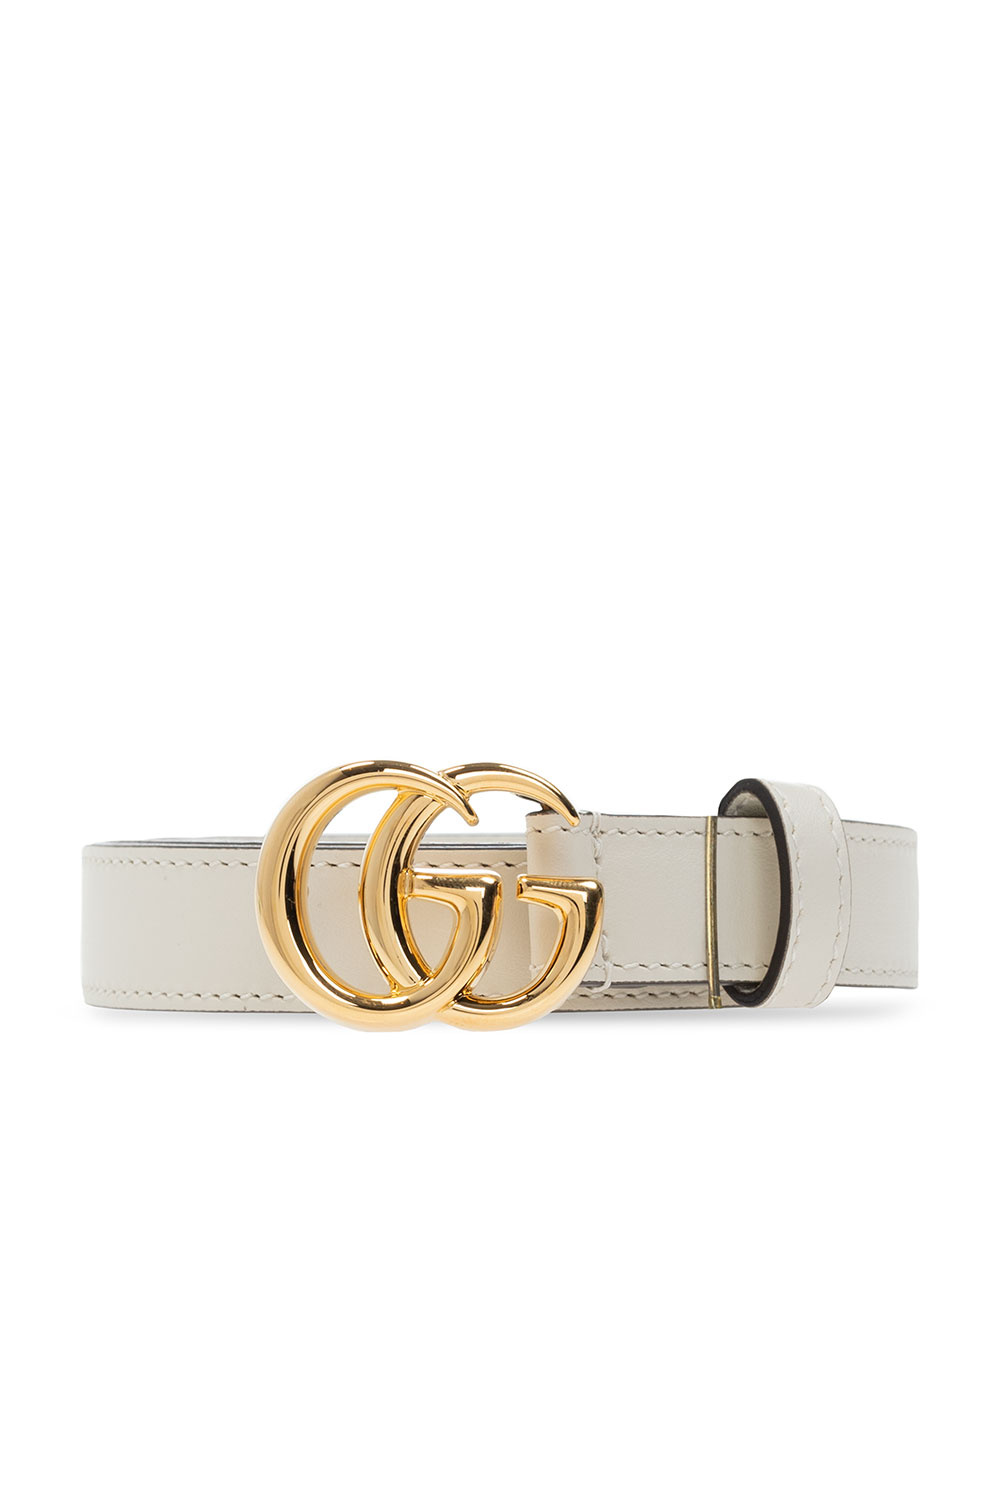 Gucci Width 2cm Leather Belt with Double G and White Crystals Buckle